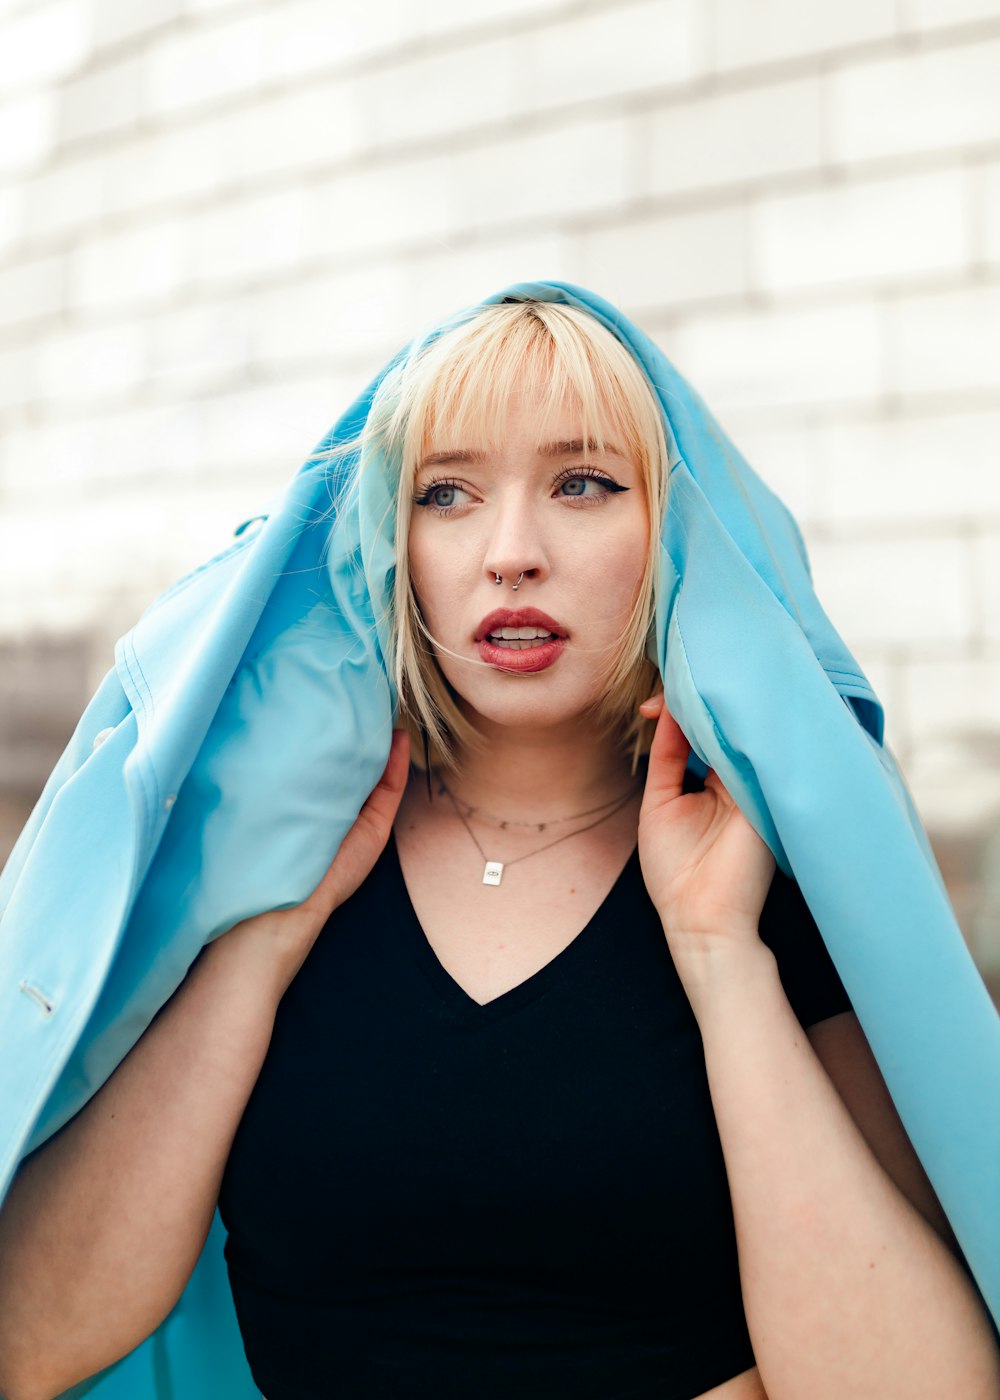 a woman in a black top is holding a blue jacket over her head